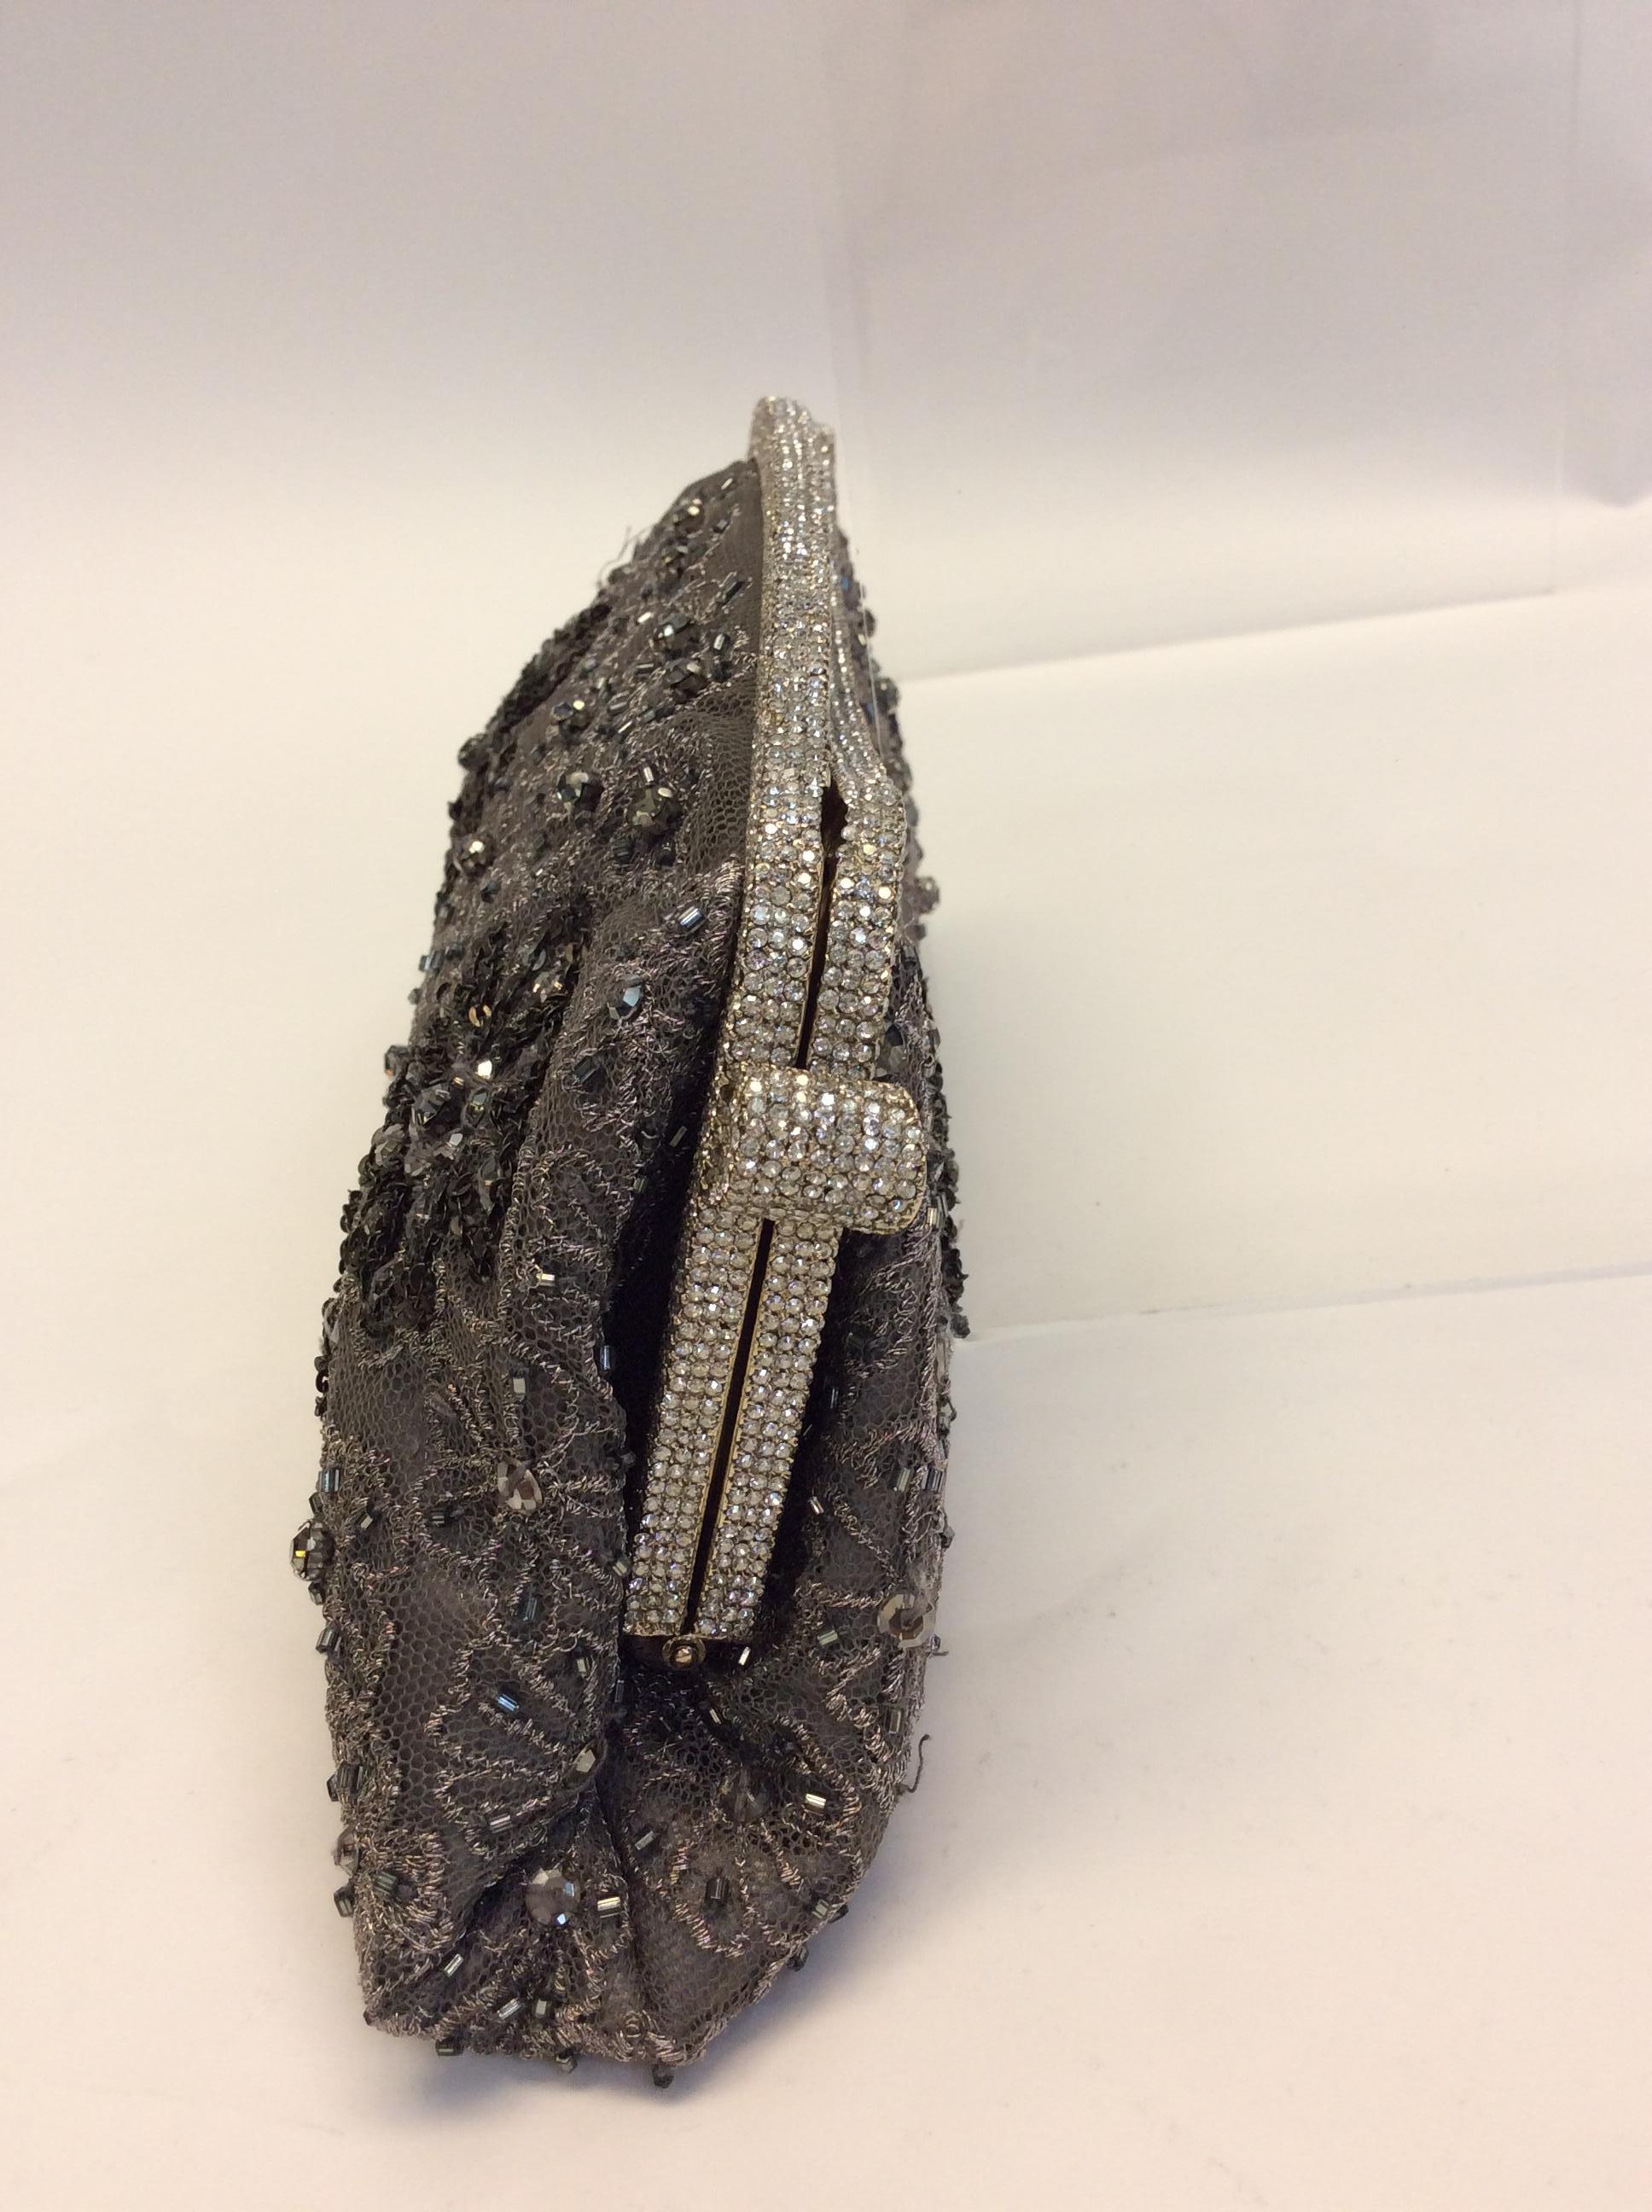 Valentino Grey and Silver Beaded Clutch
$499
Made in Italy
9.5